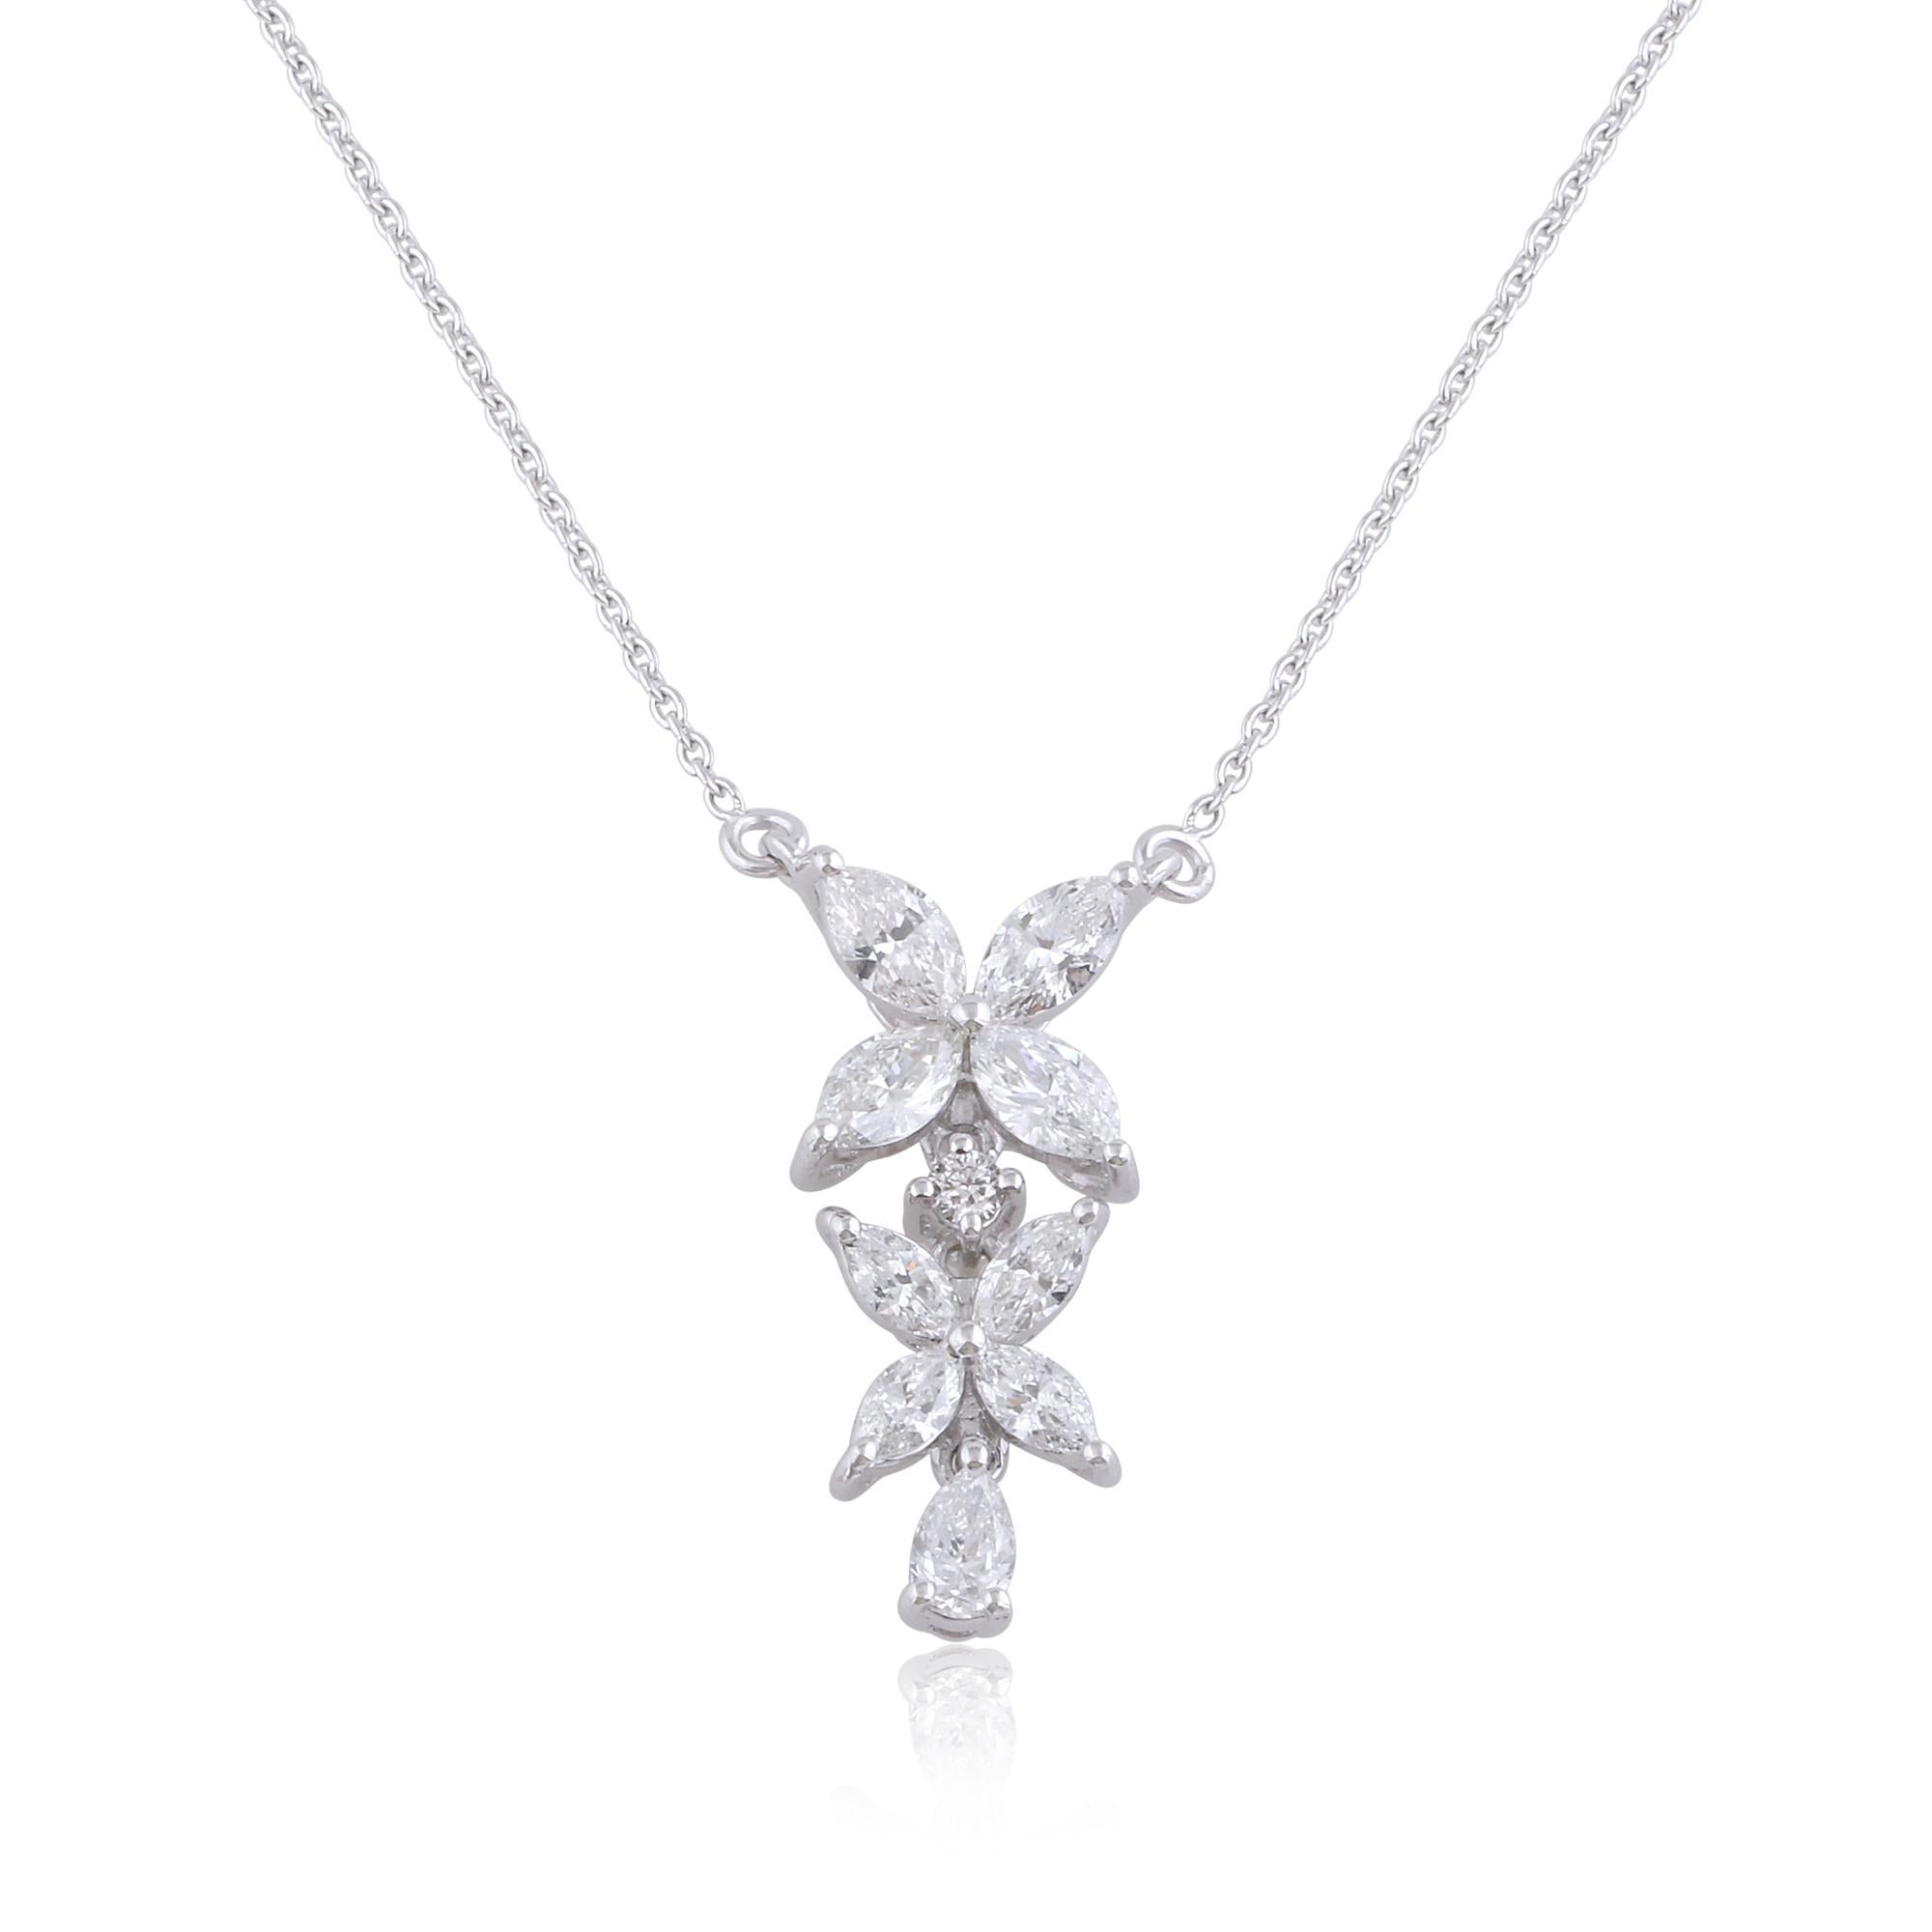 Indulge in the enchanting beauty of this marquise, pear, and round diamond charm pendant necklace, meticulously crafted in 18 karat white gold. This exquisite piece of jewelry showcases elegance, sophistication, and exceptional craftsmanship.

Code